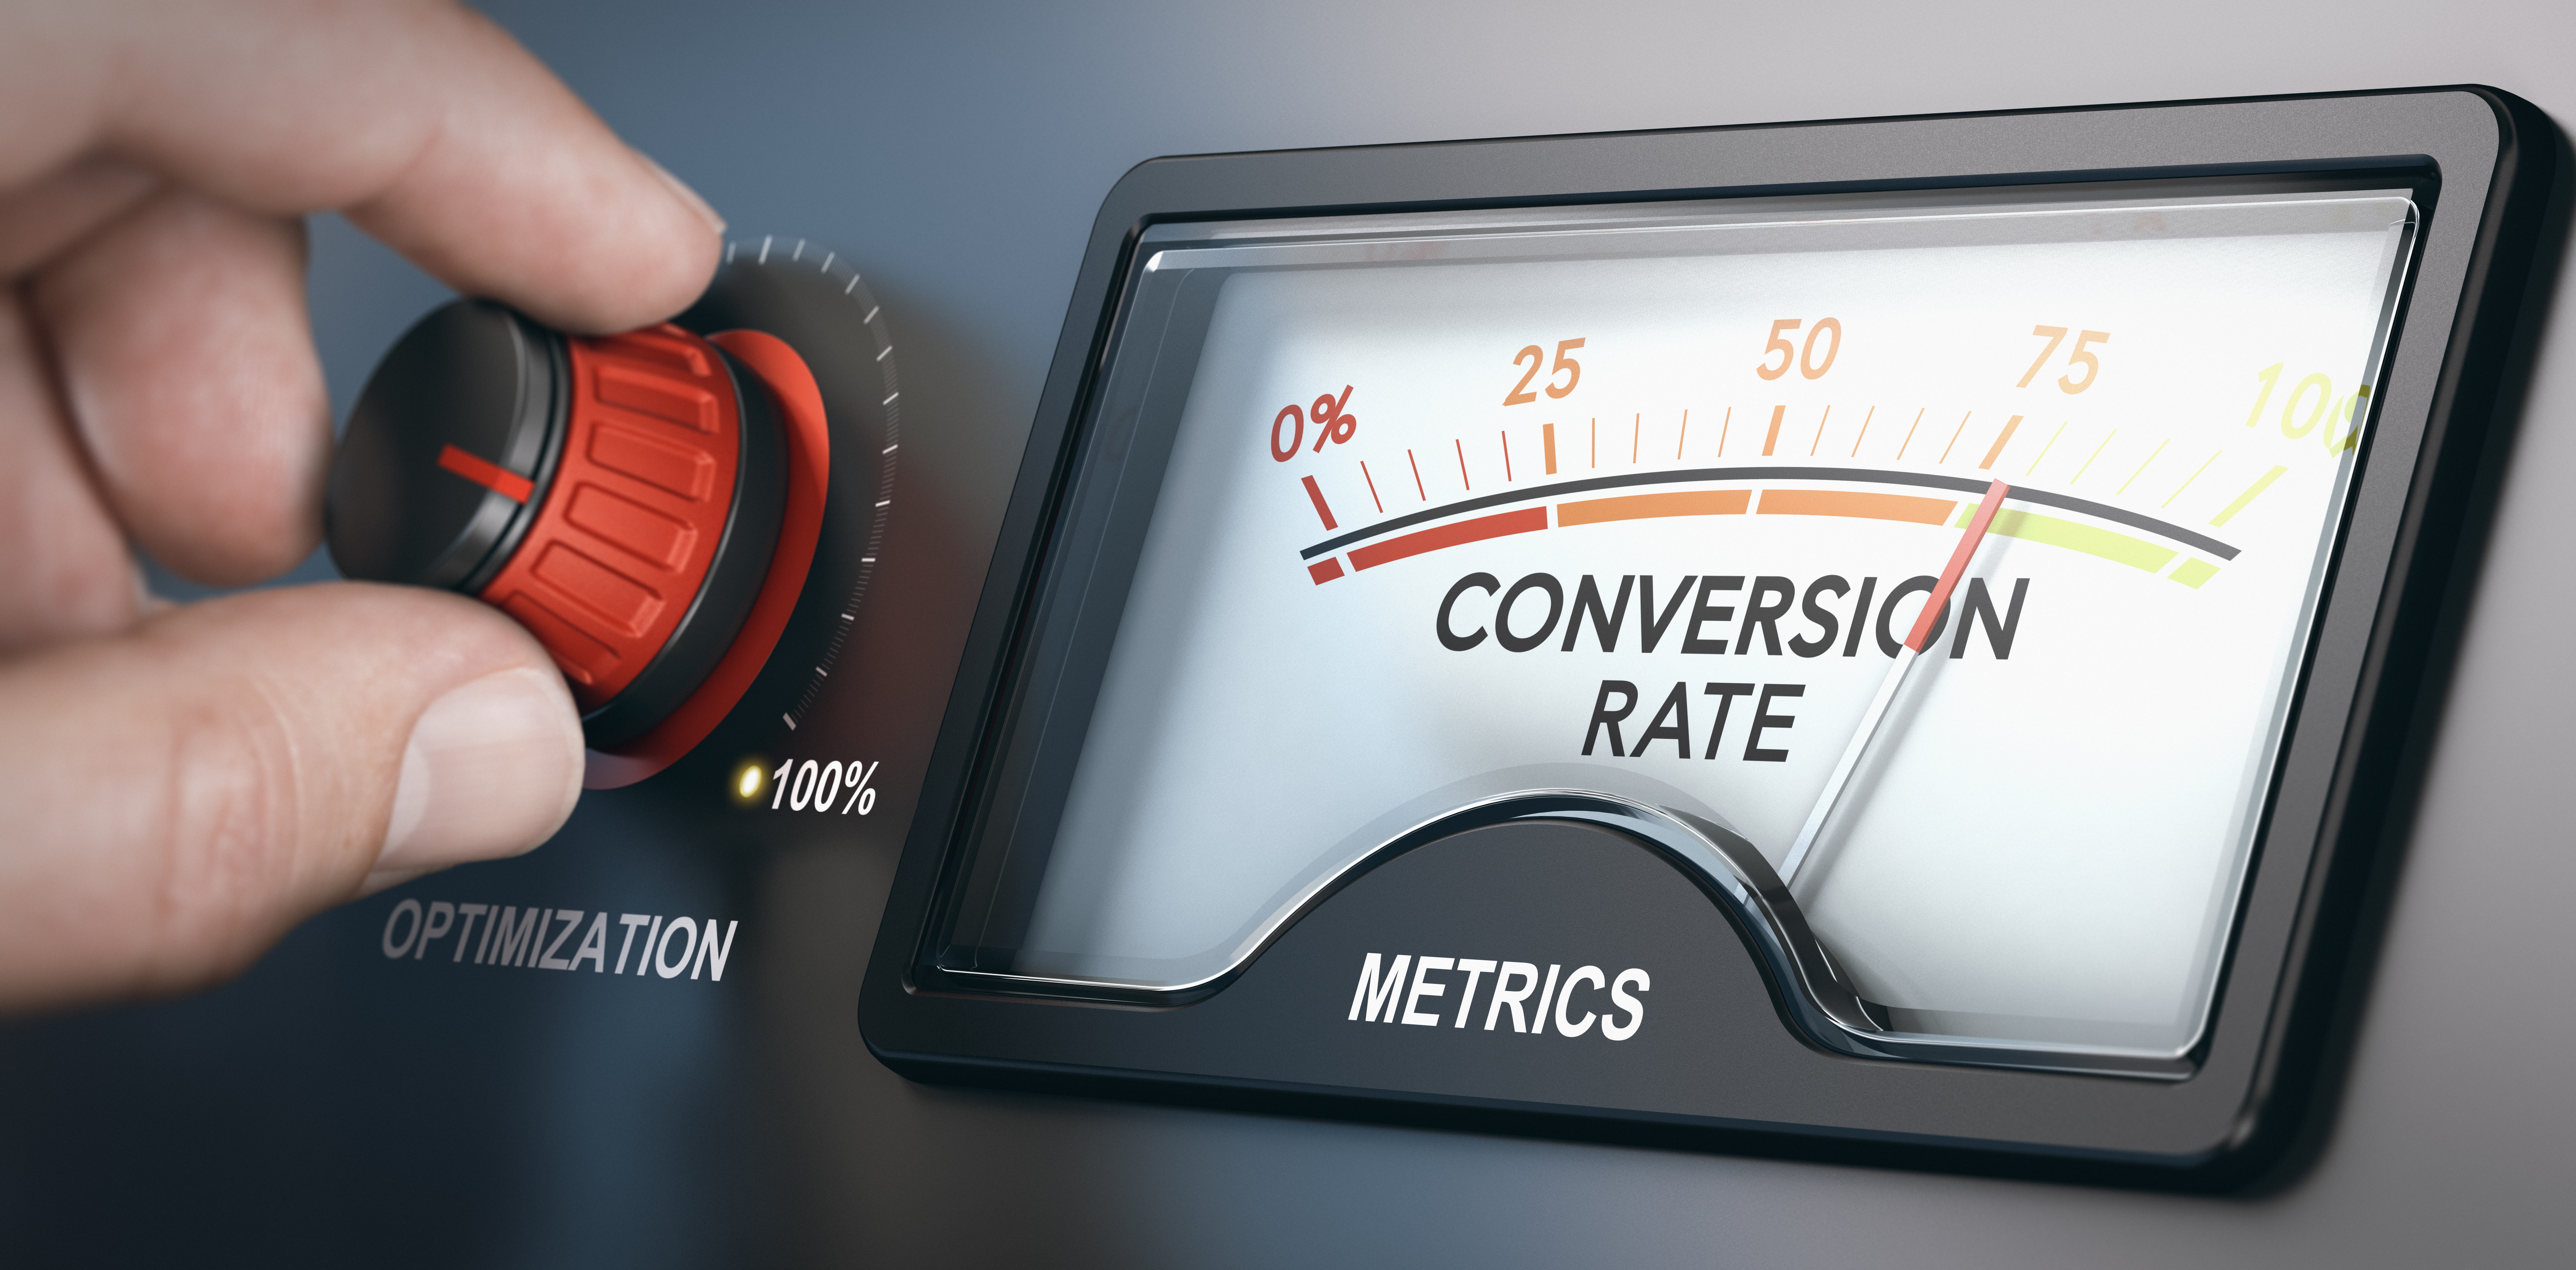 A meter to dial up conversion rates